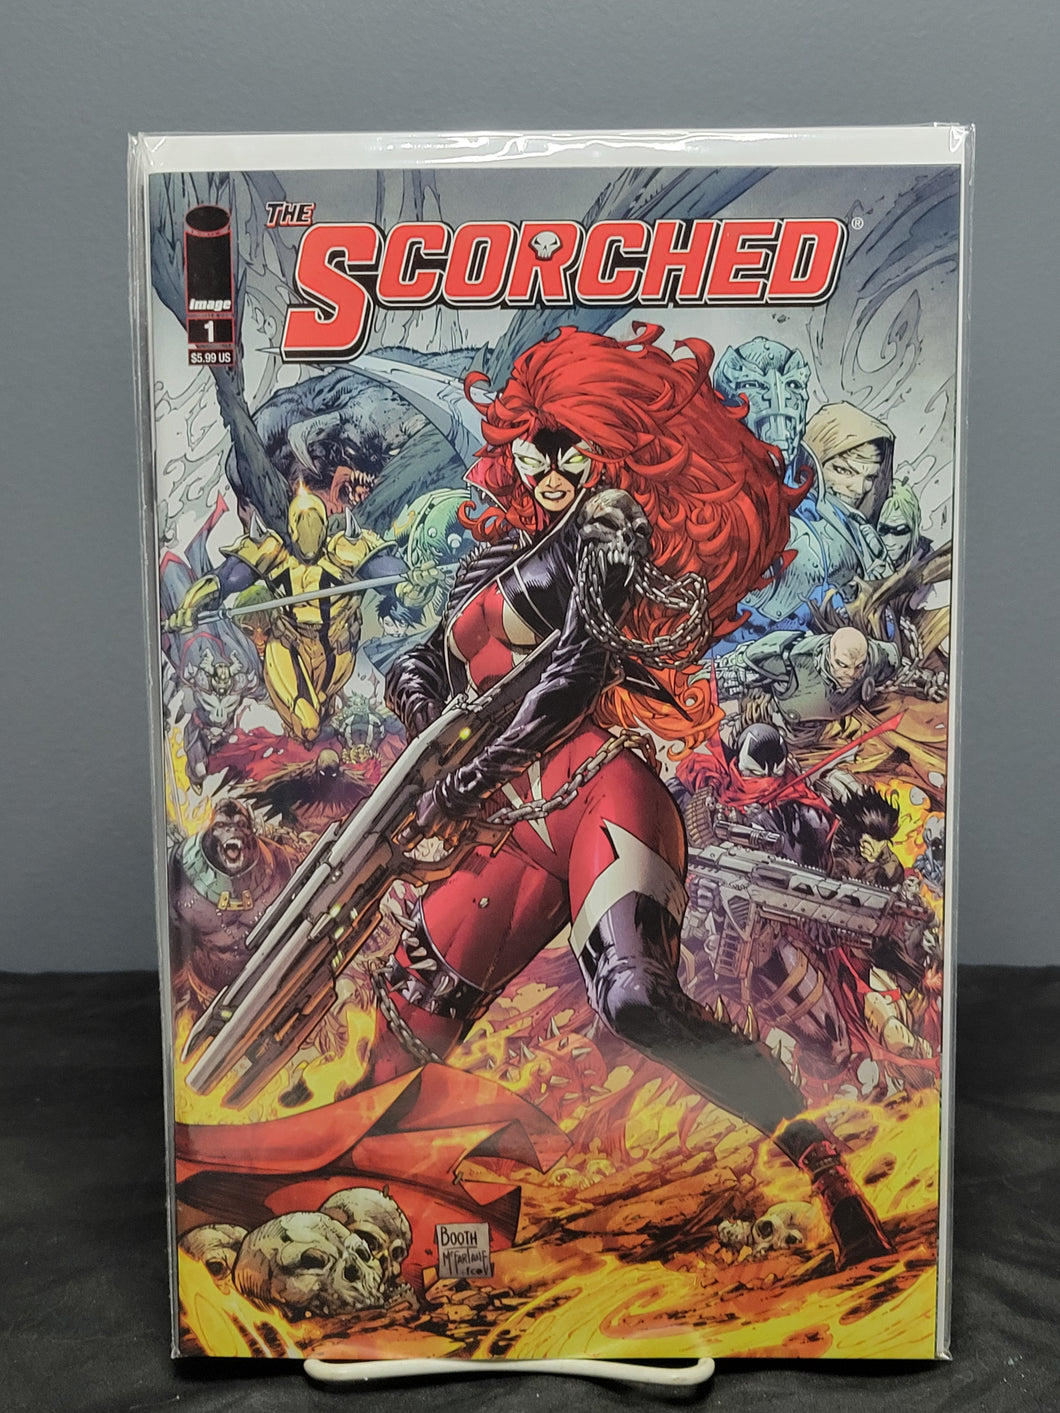 Scorched #1 Variant